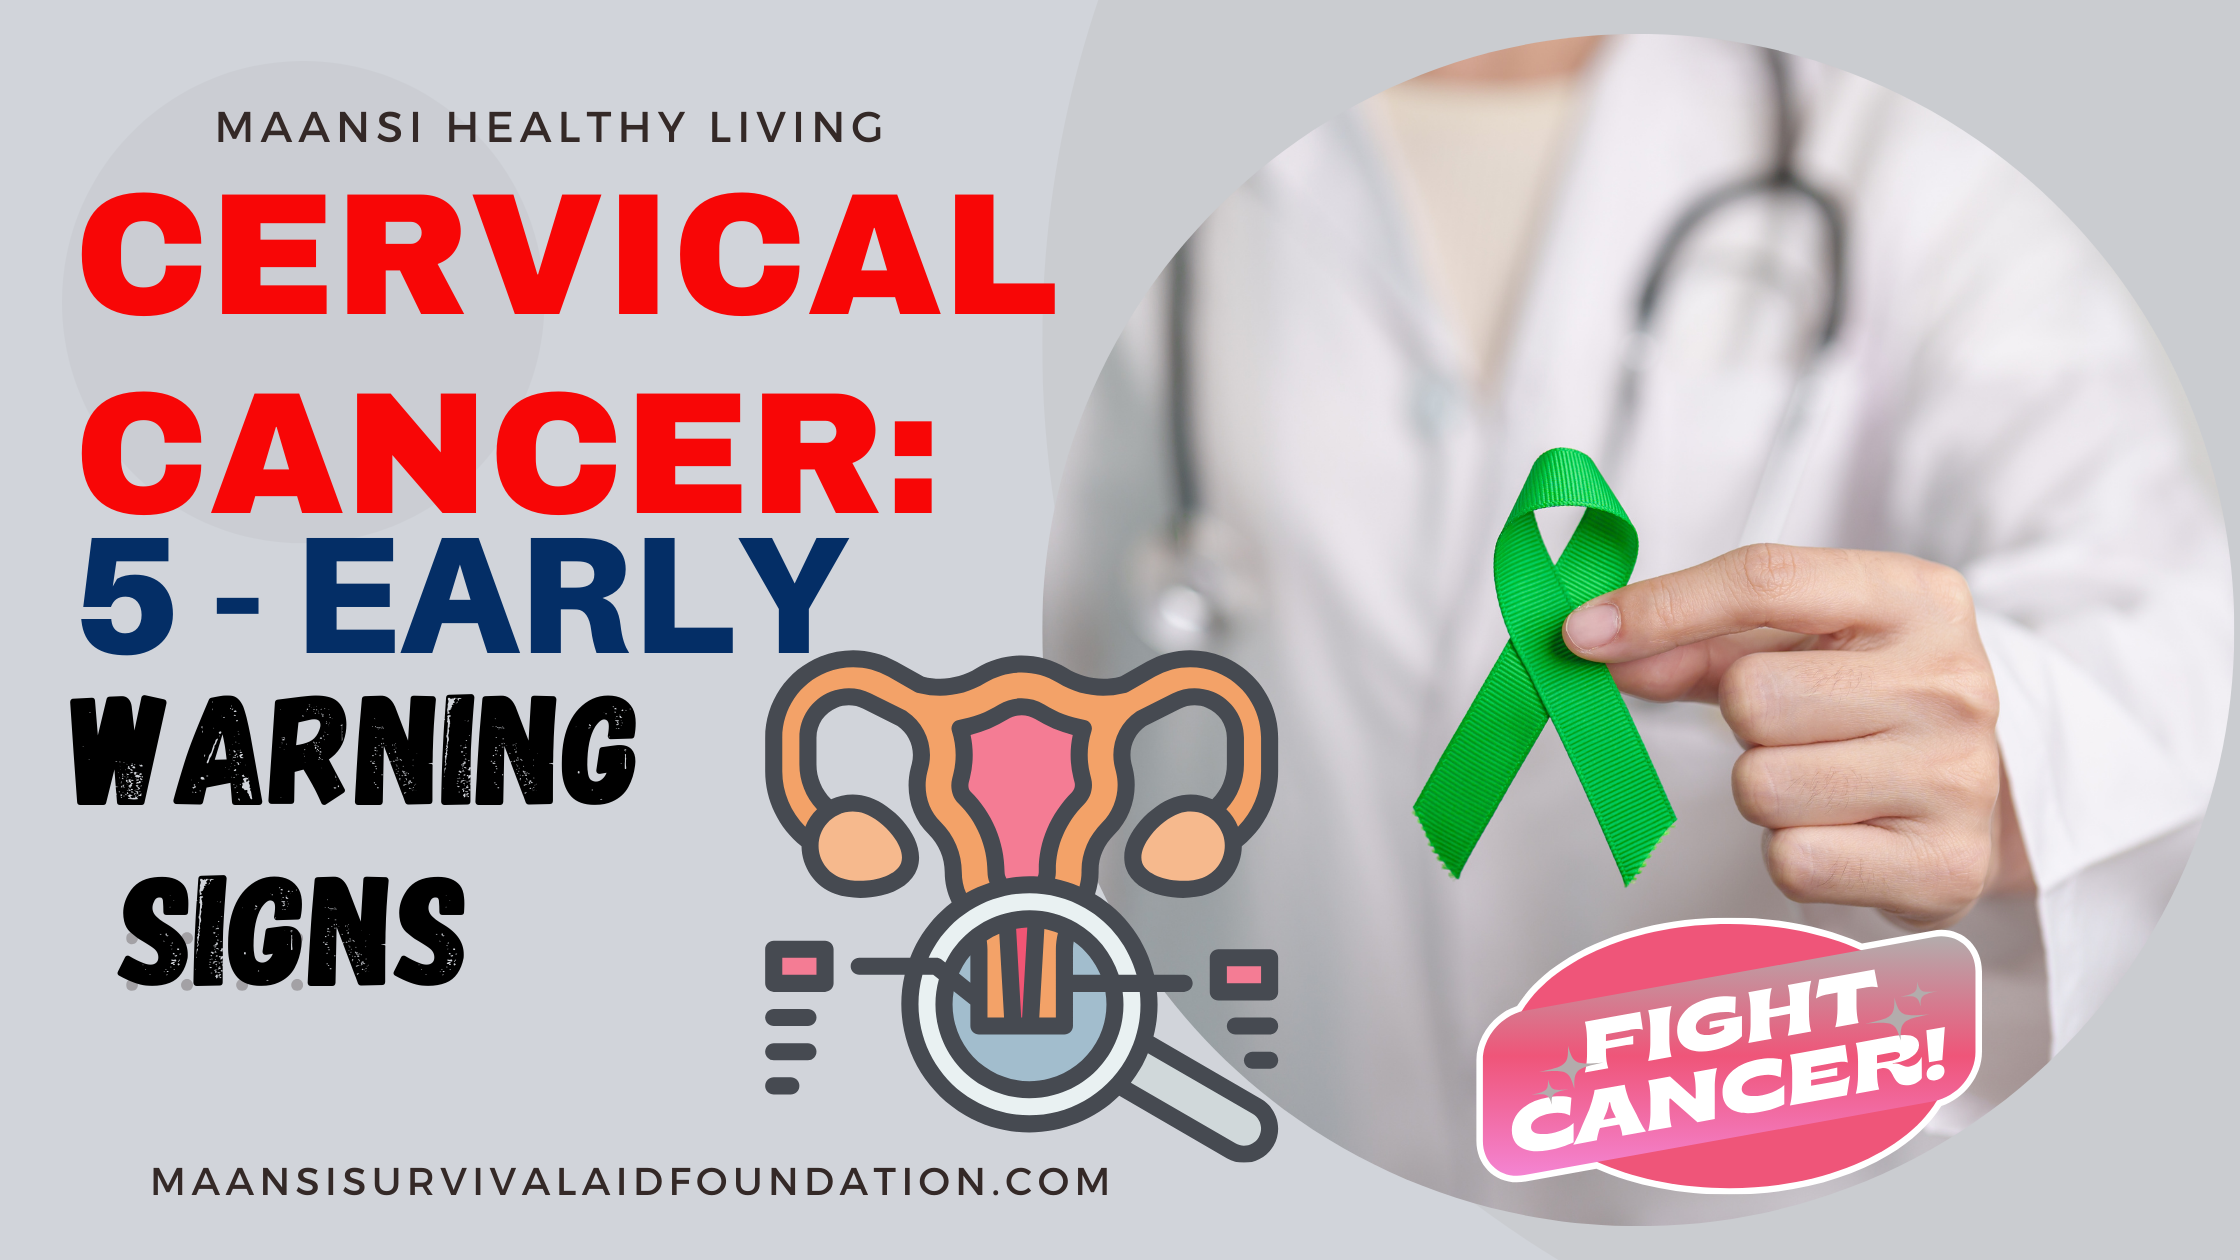 Cervical Cancer: 5 Early warning signs!